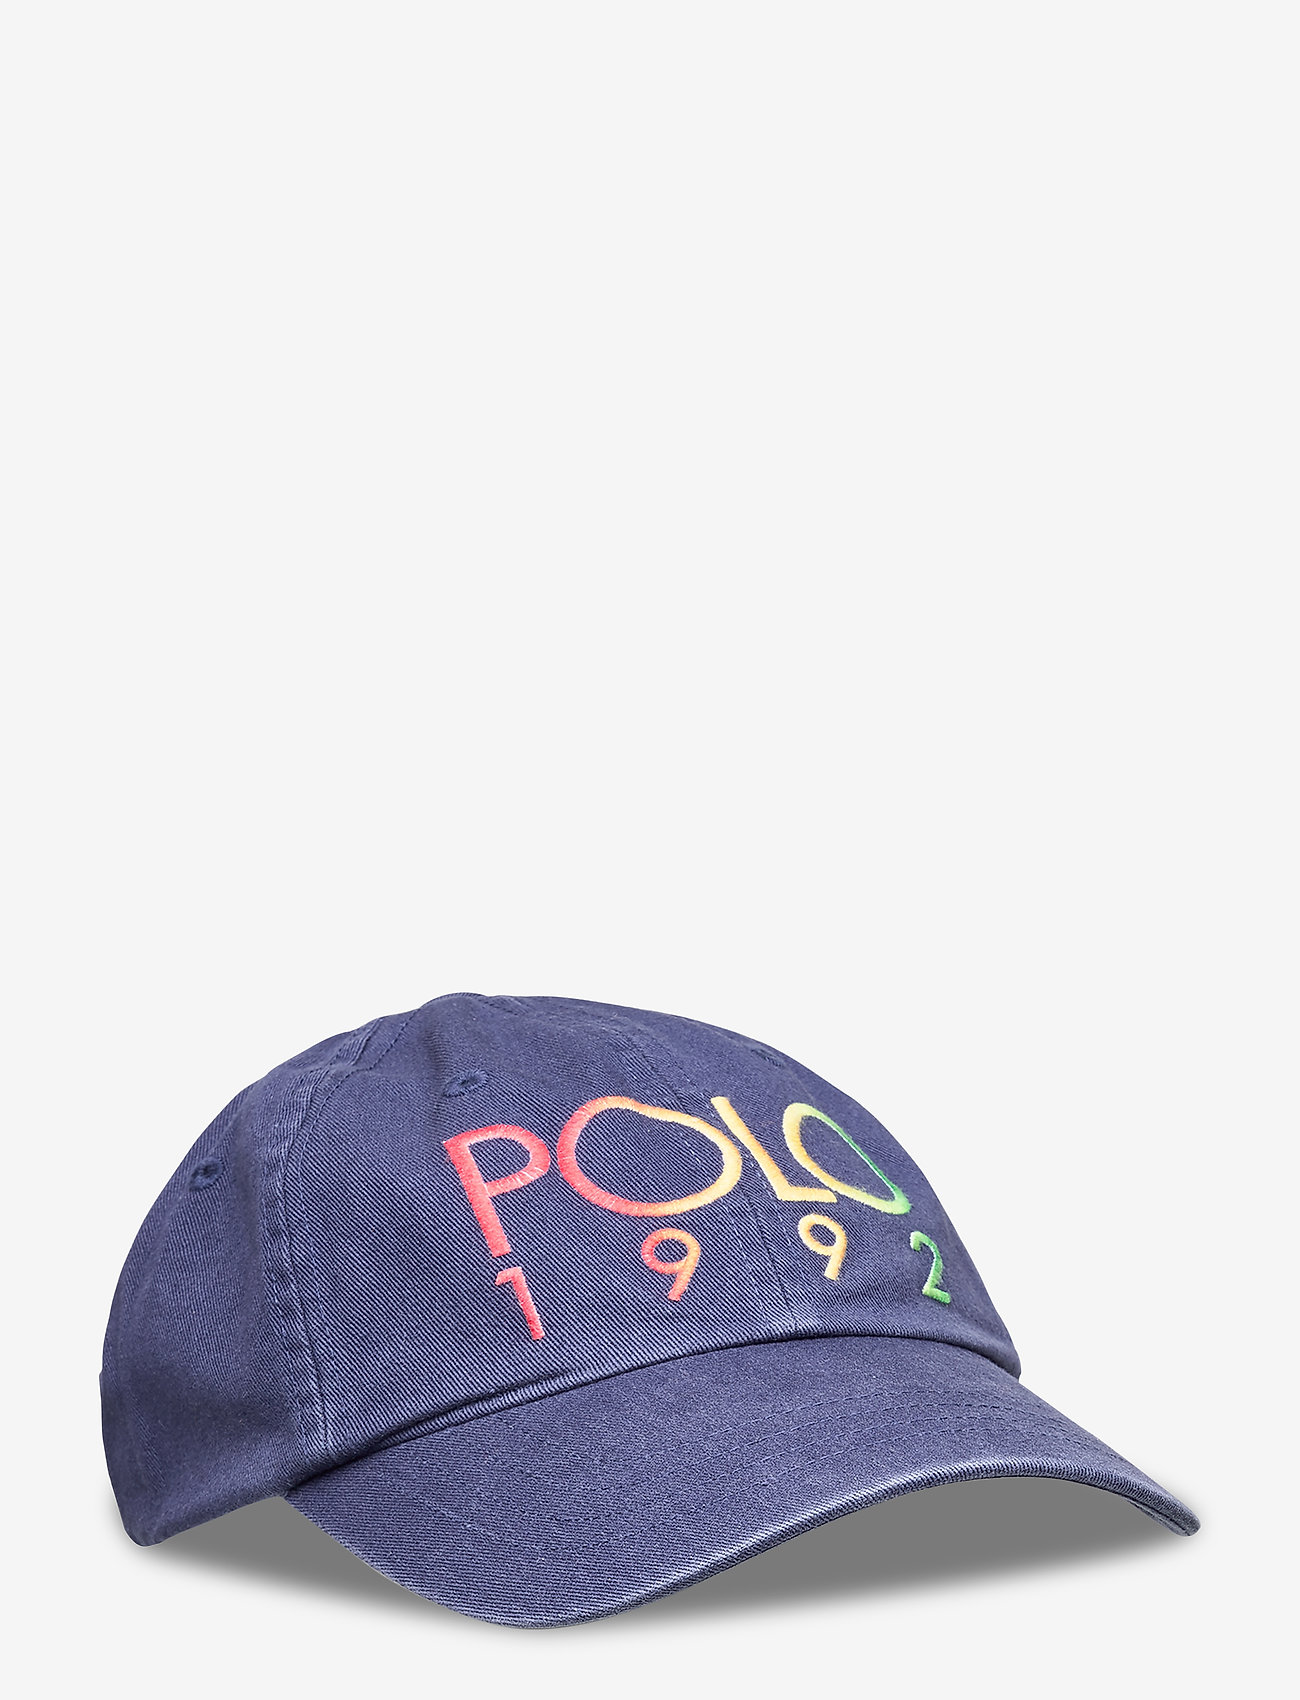 polo 1992 hat